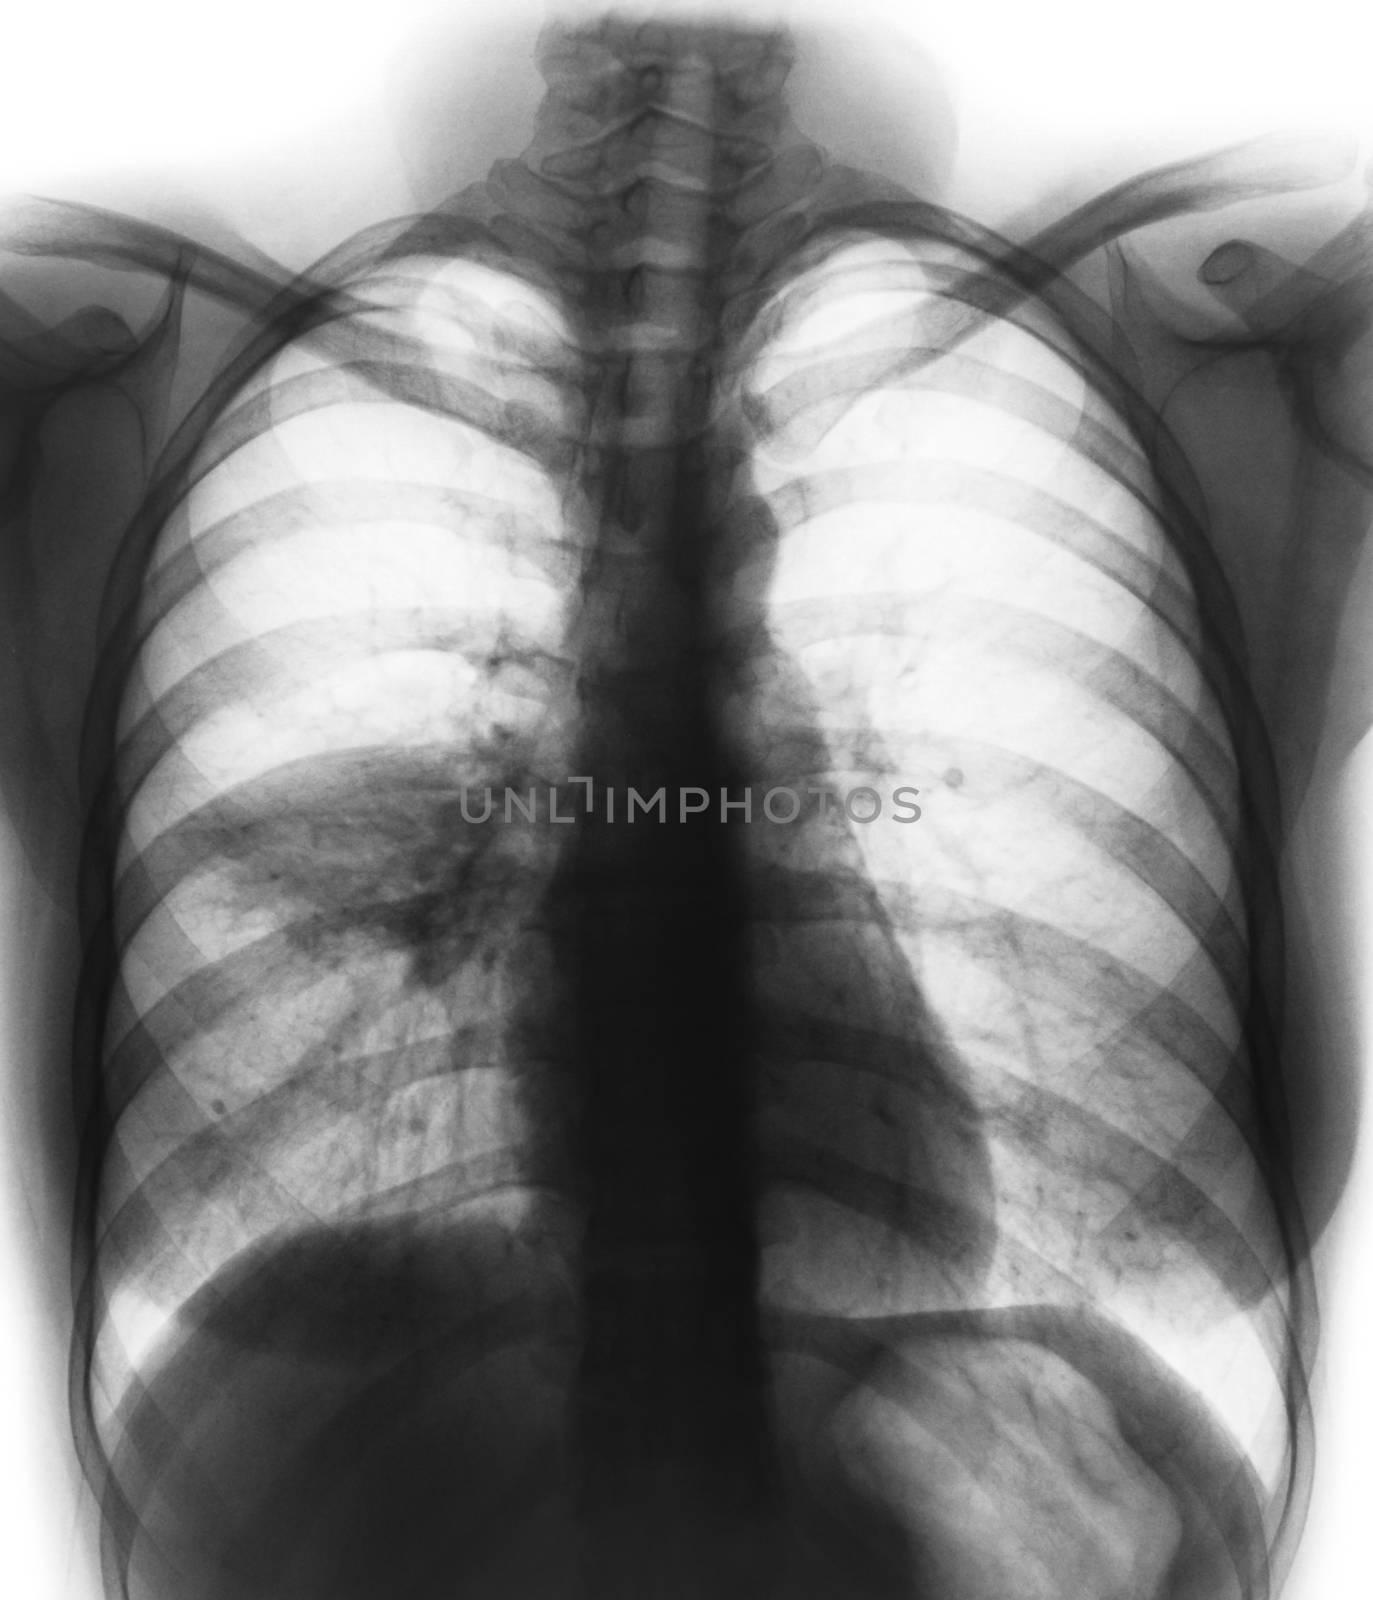 Pneumonia ( film chest x-ray show alveolar infiltrate at right middle lung ) ( image for pulmonary tuberculosis . Mers-CoV . SARS )